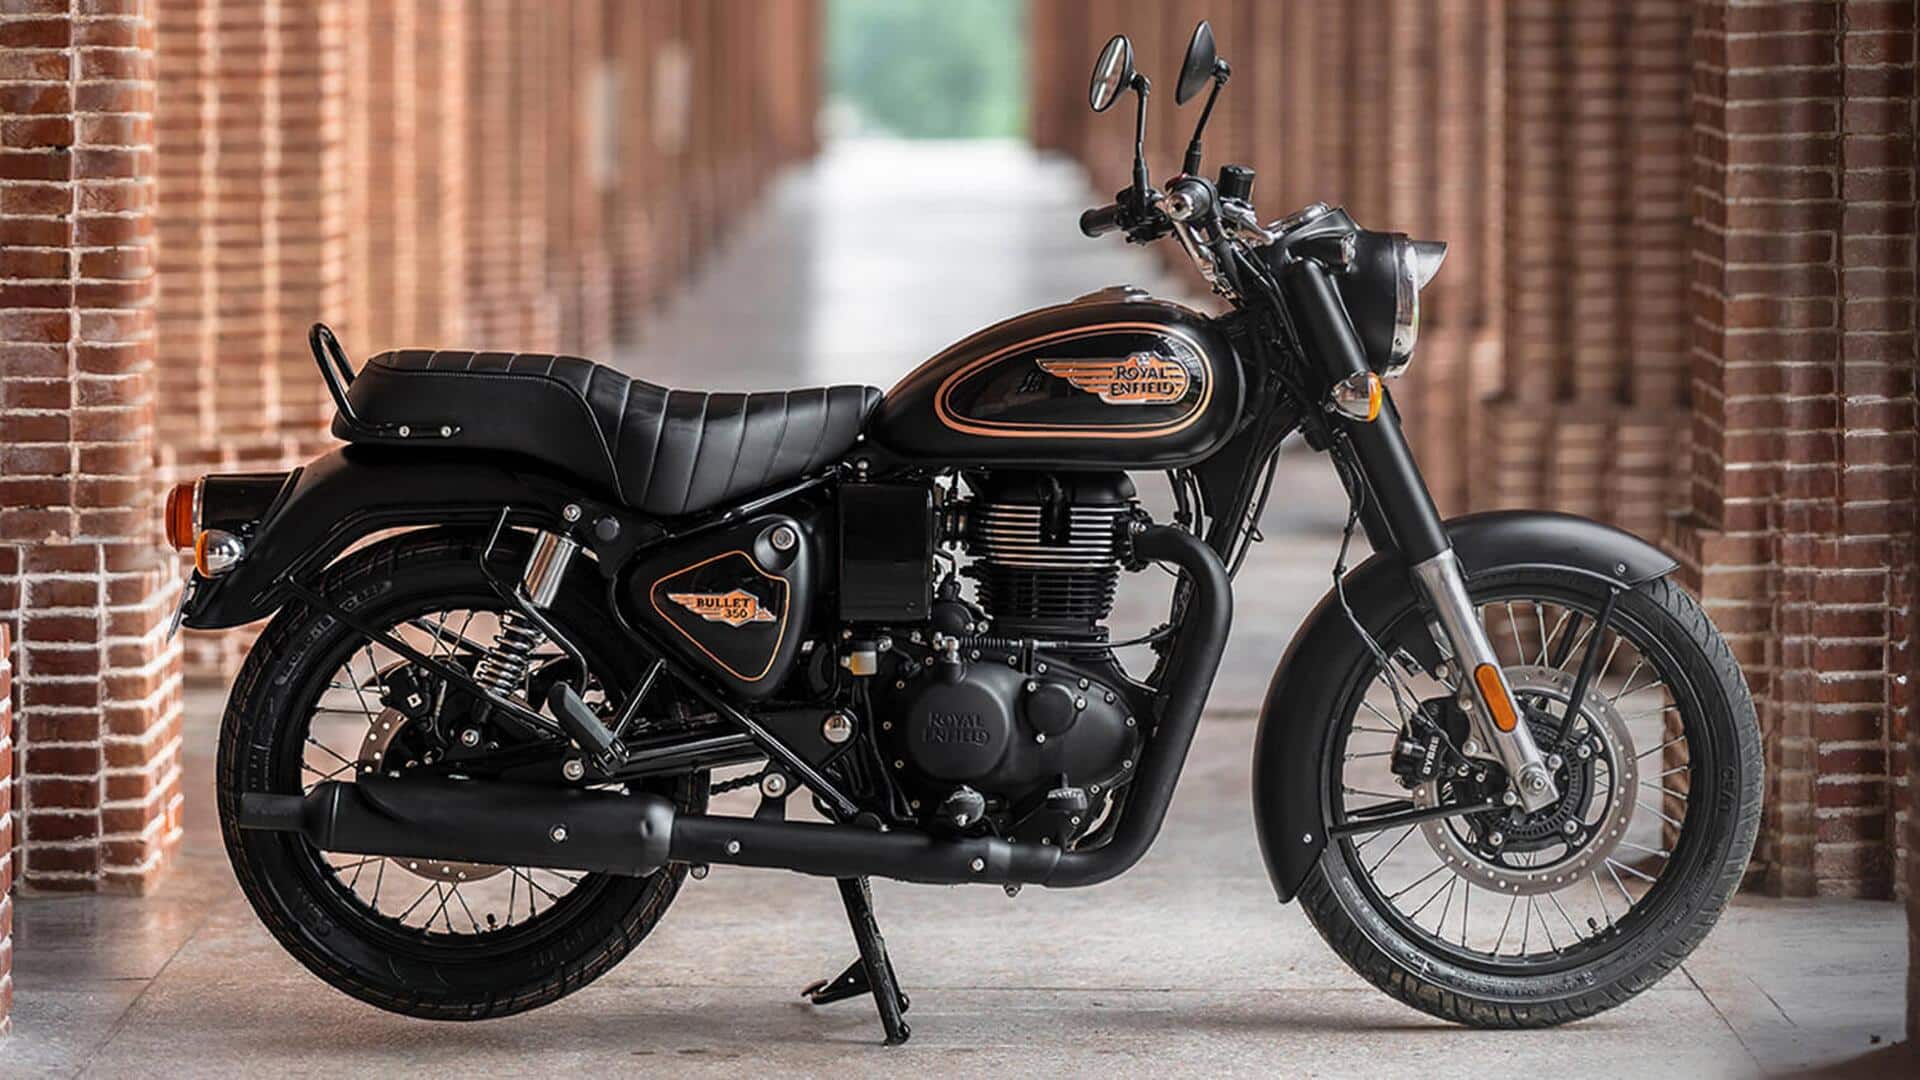 Variant-wise features of 2023 Royal Enfield Bullet 350, explained